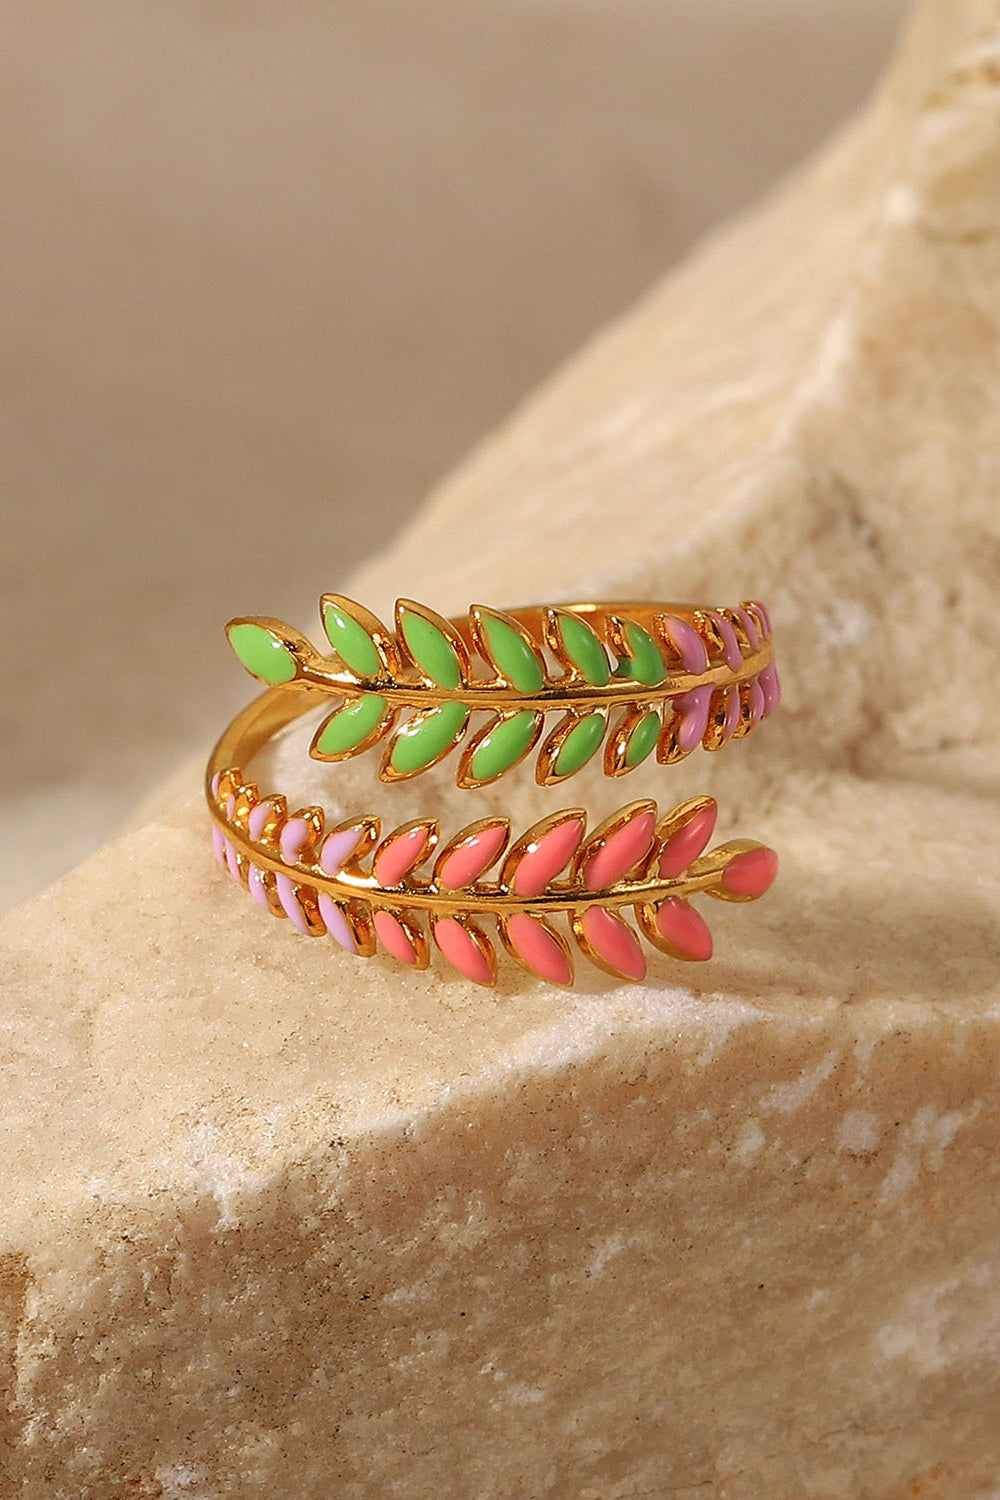 Multicolored Leaf Bypass Ring